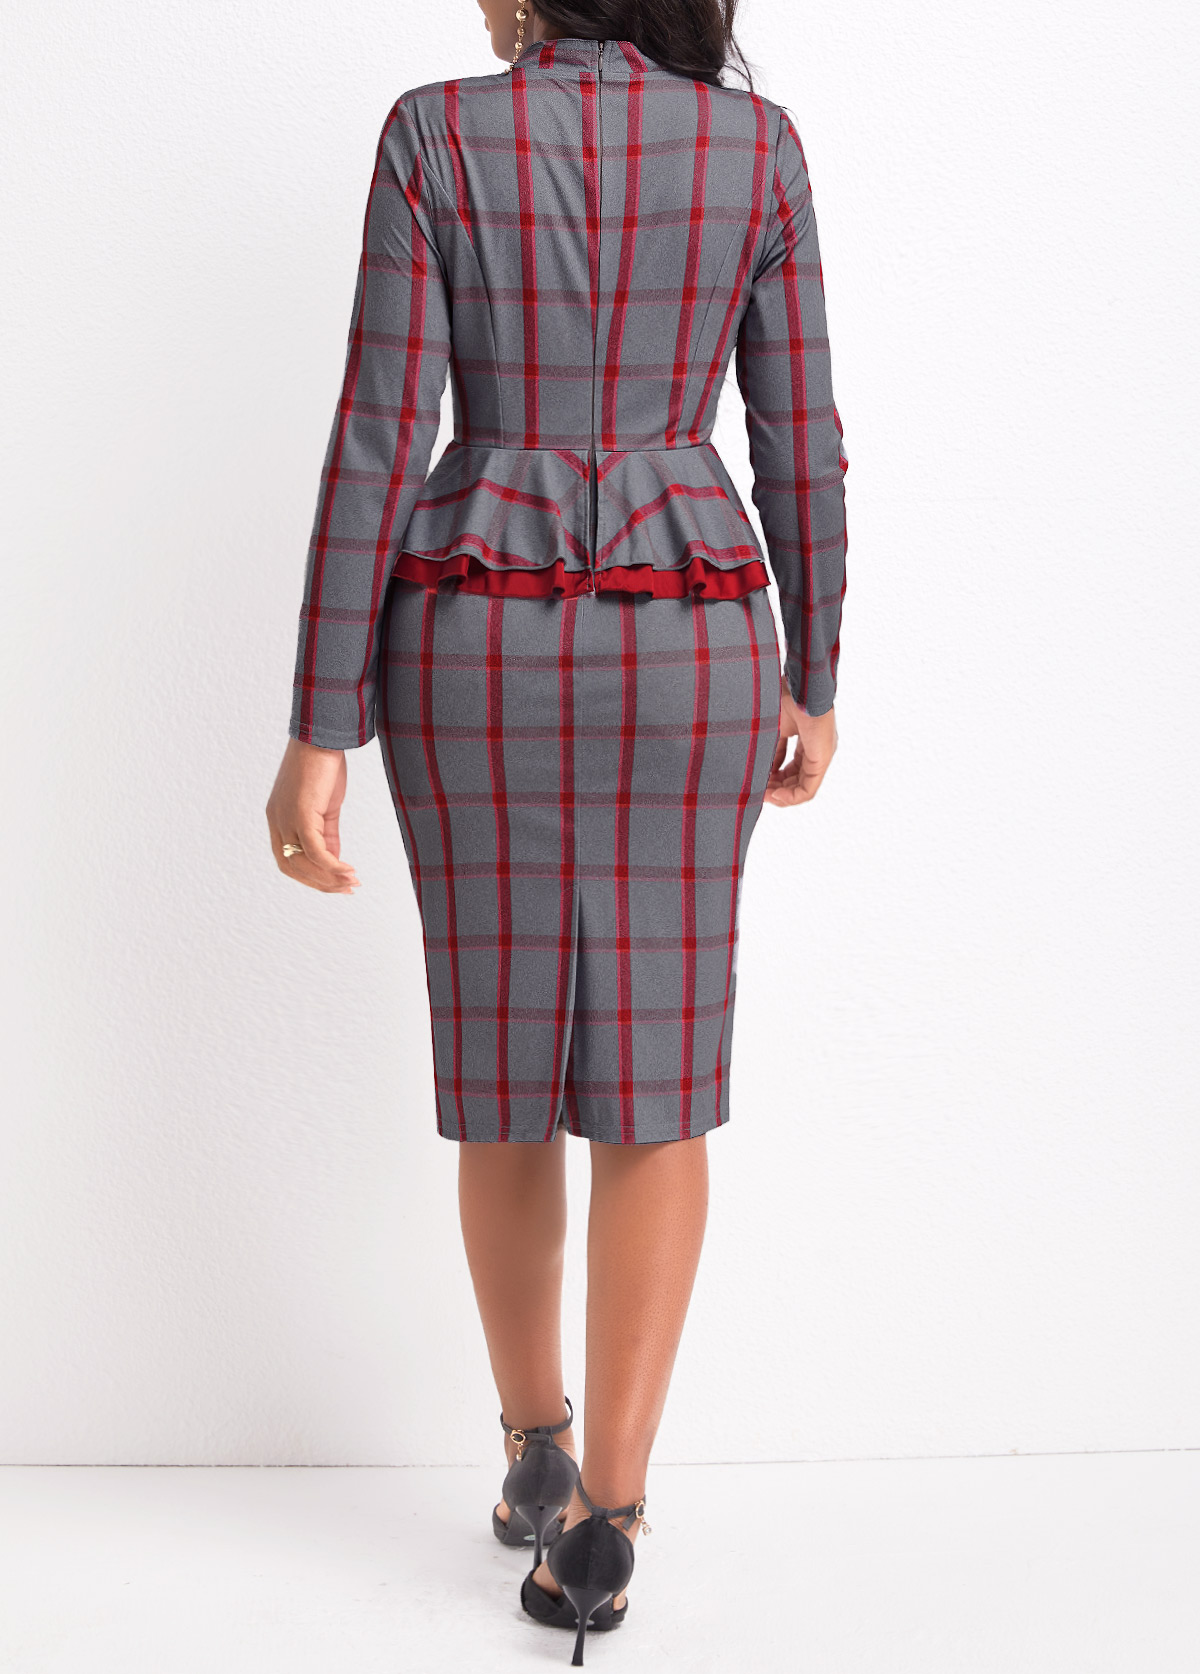 Red Ruffle Plaid Long Sleeve Stand Collar Bodycon Dress